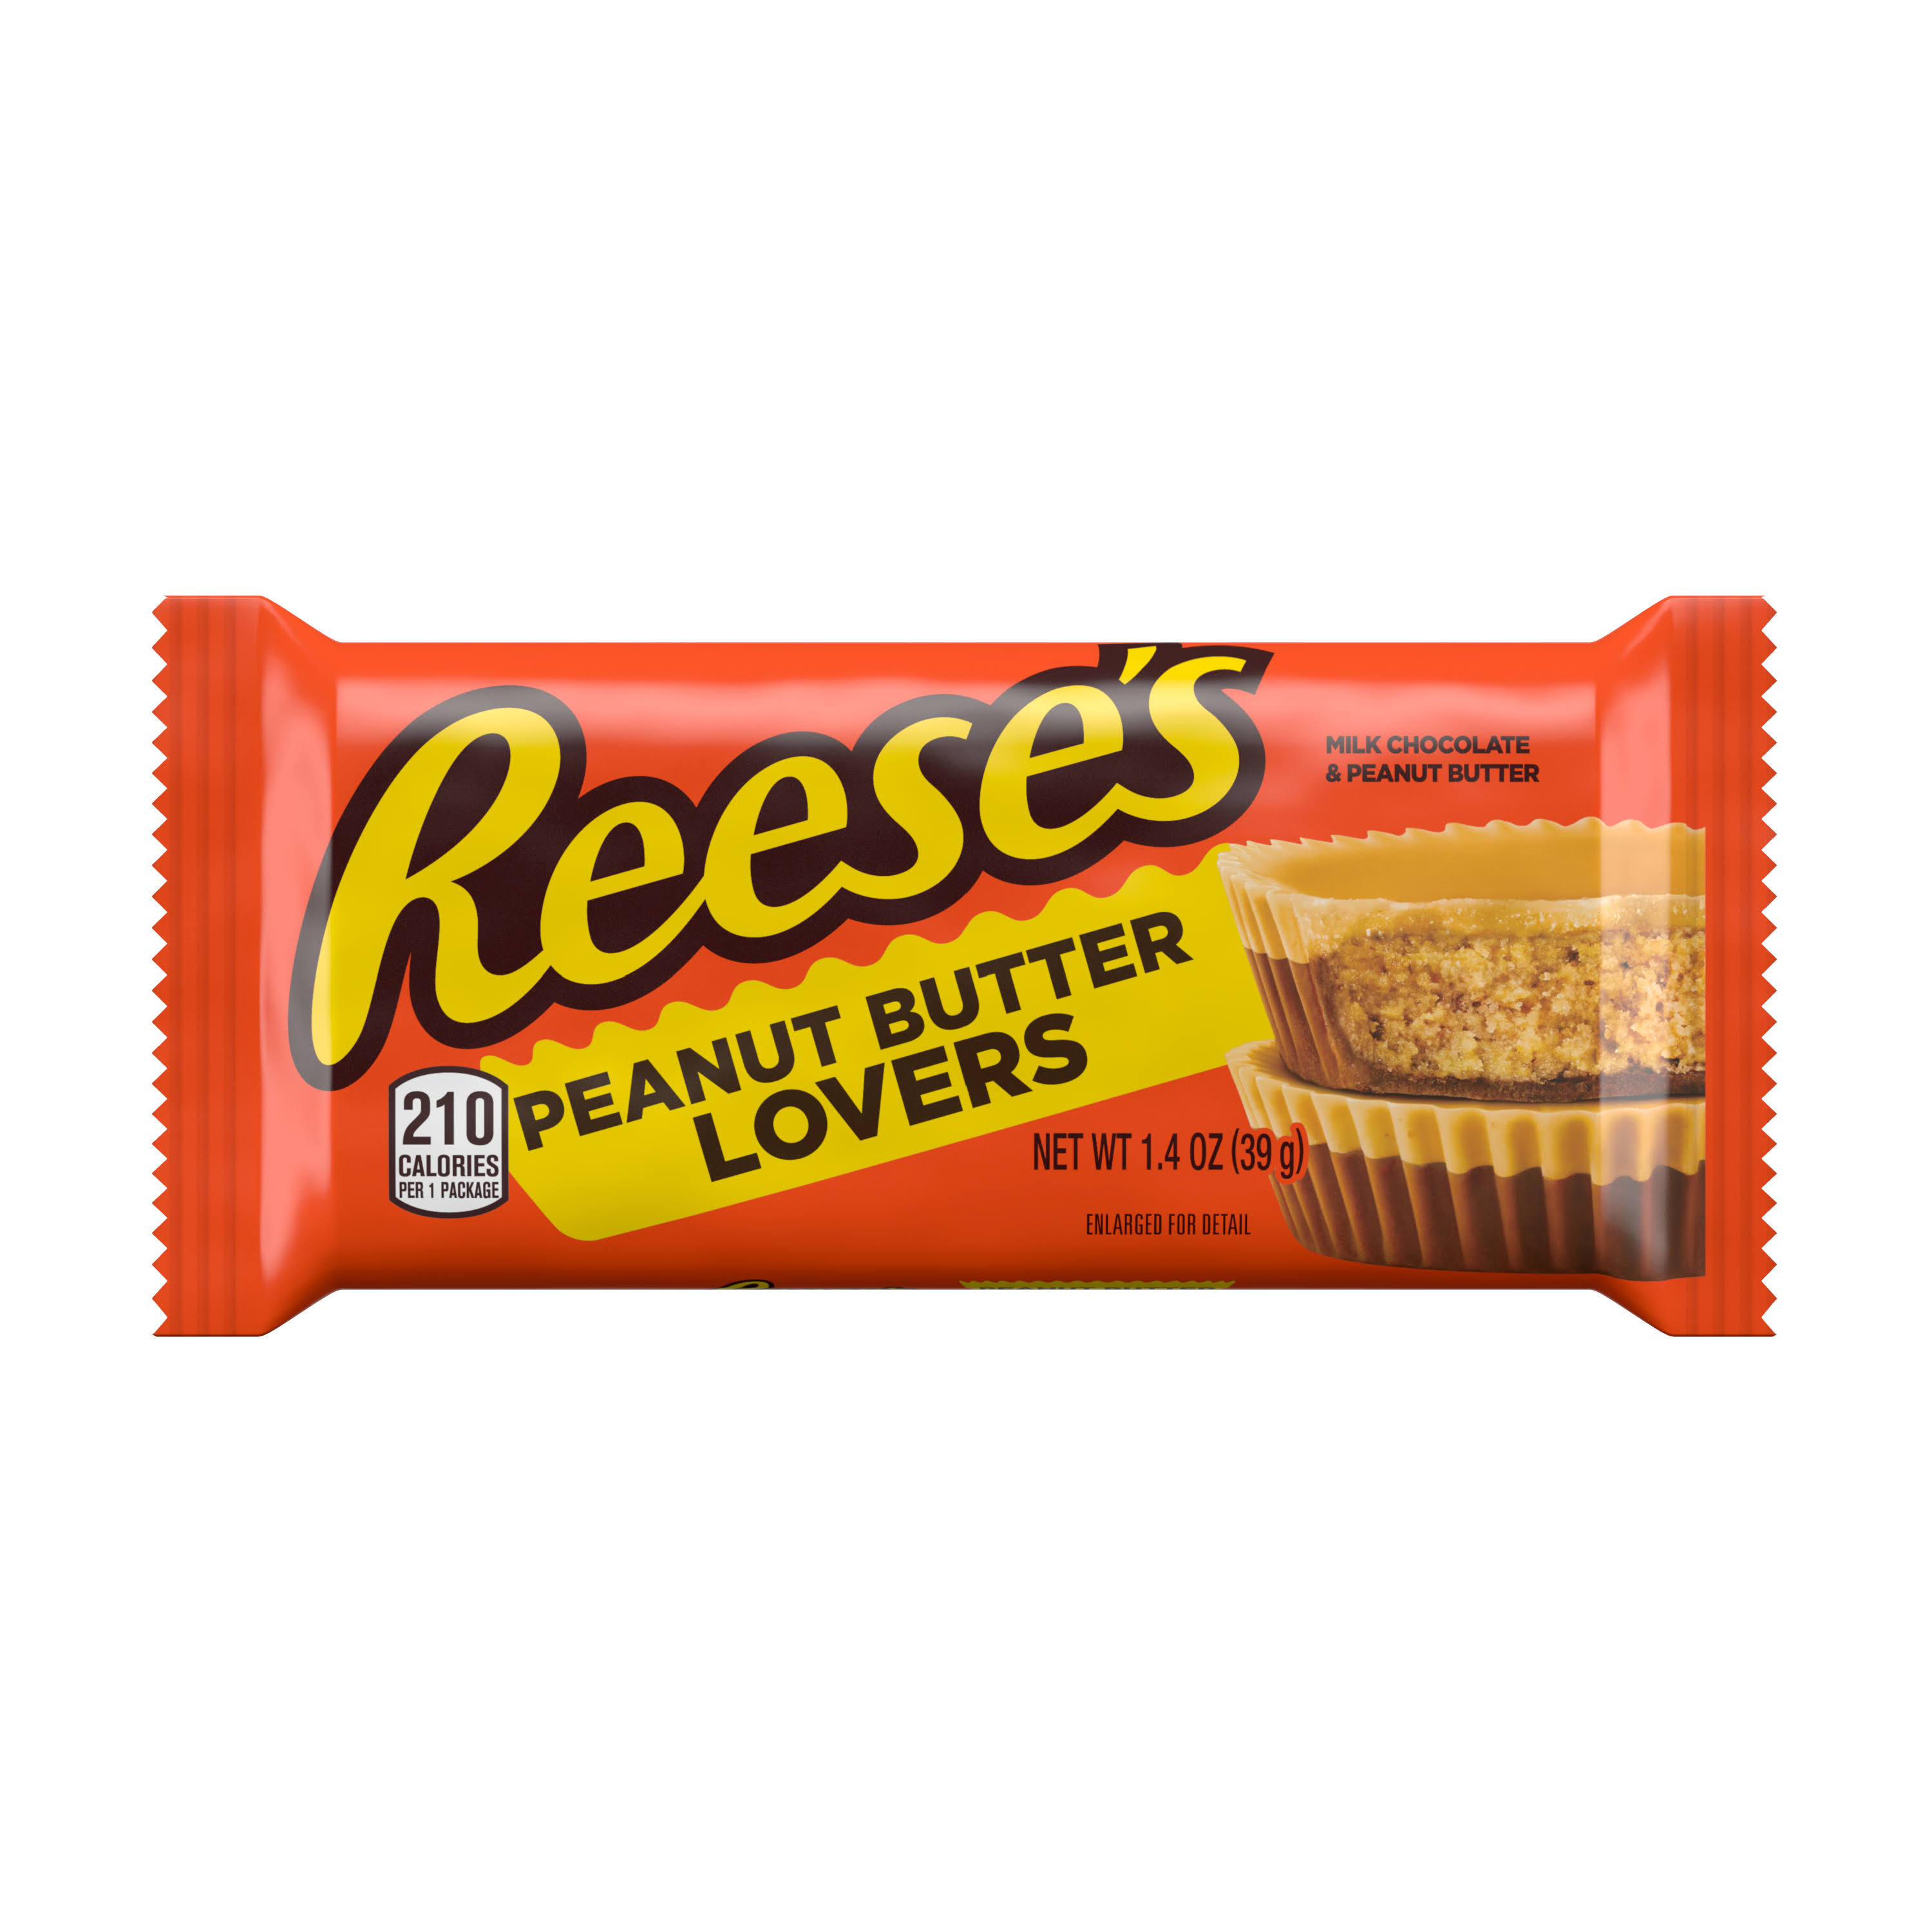 Reese's Peanut Butter Lovers - 1.4 oz